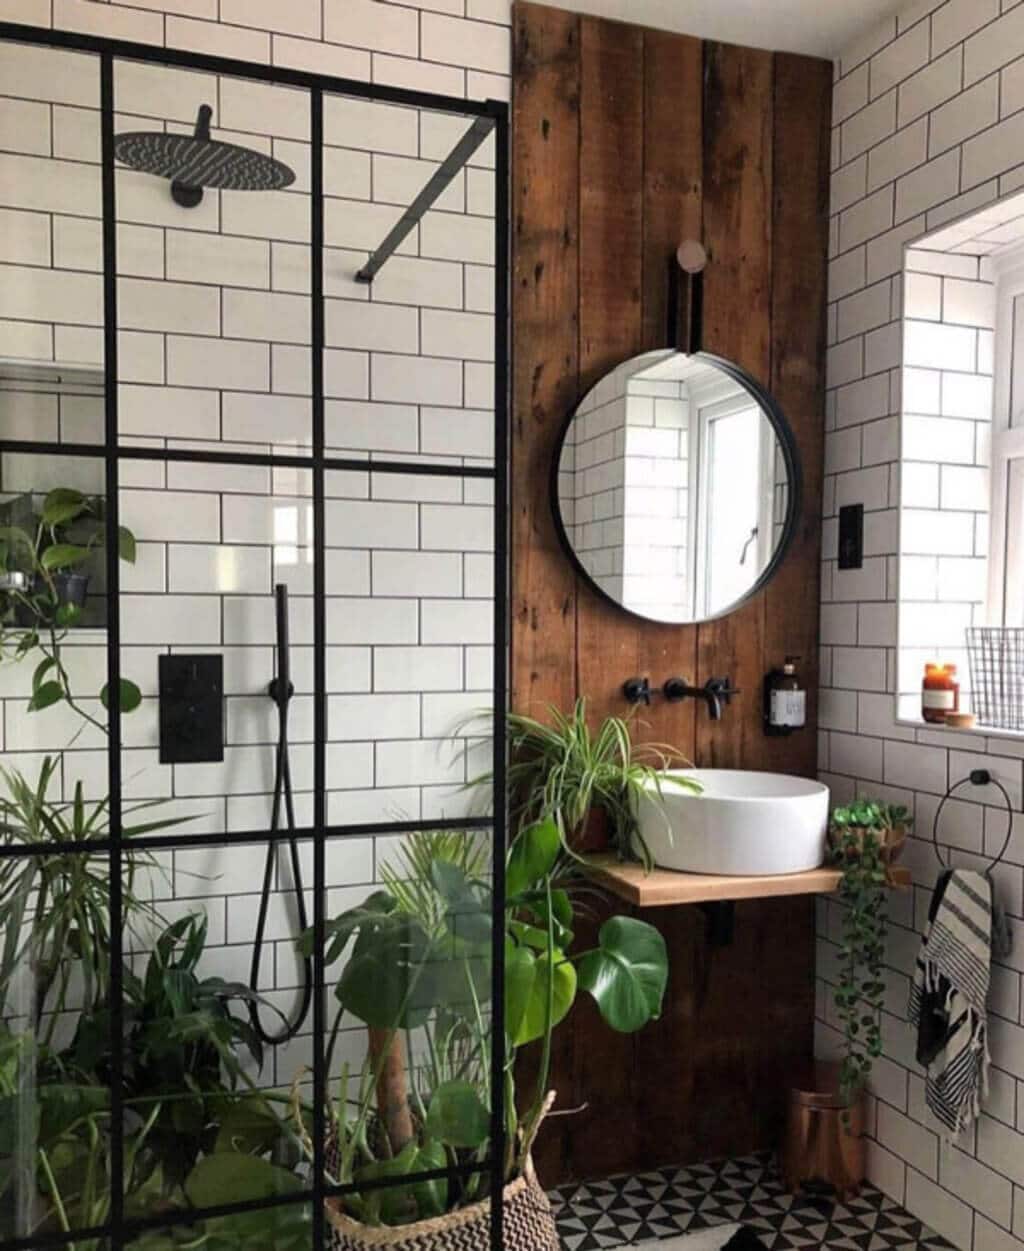 A bathroom with a sink, mirror and plants
